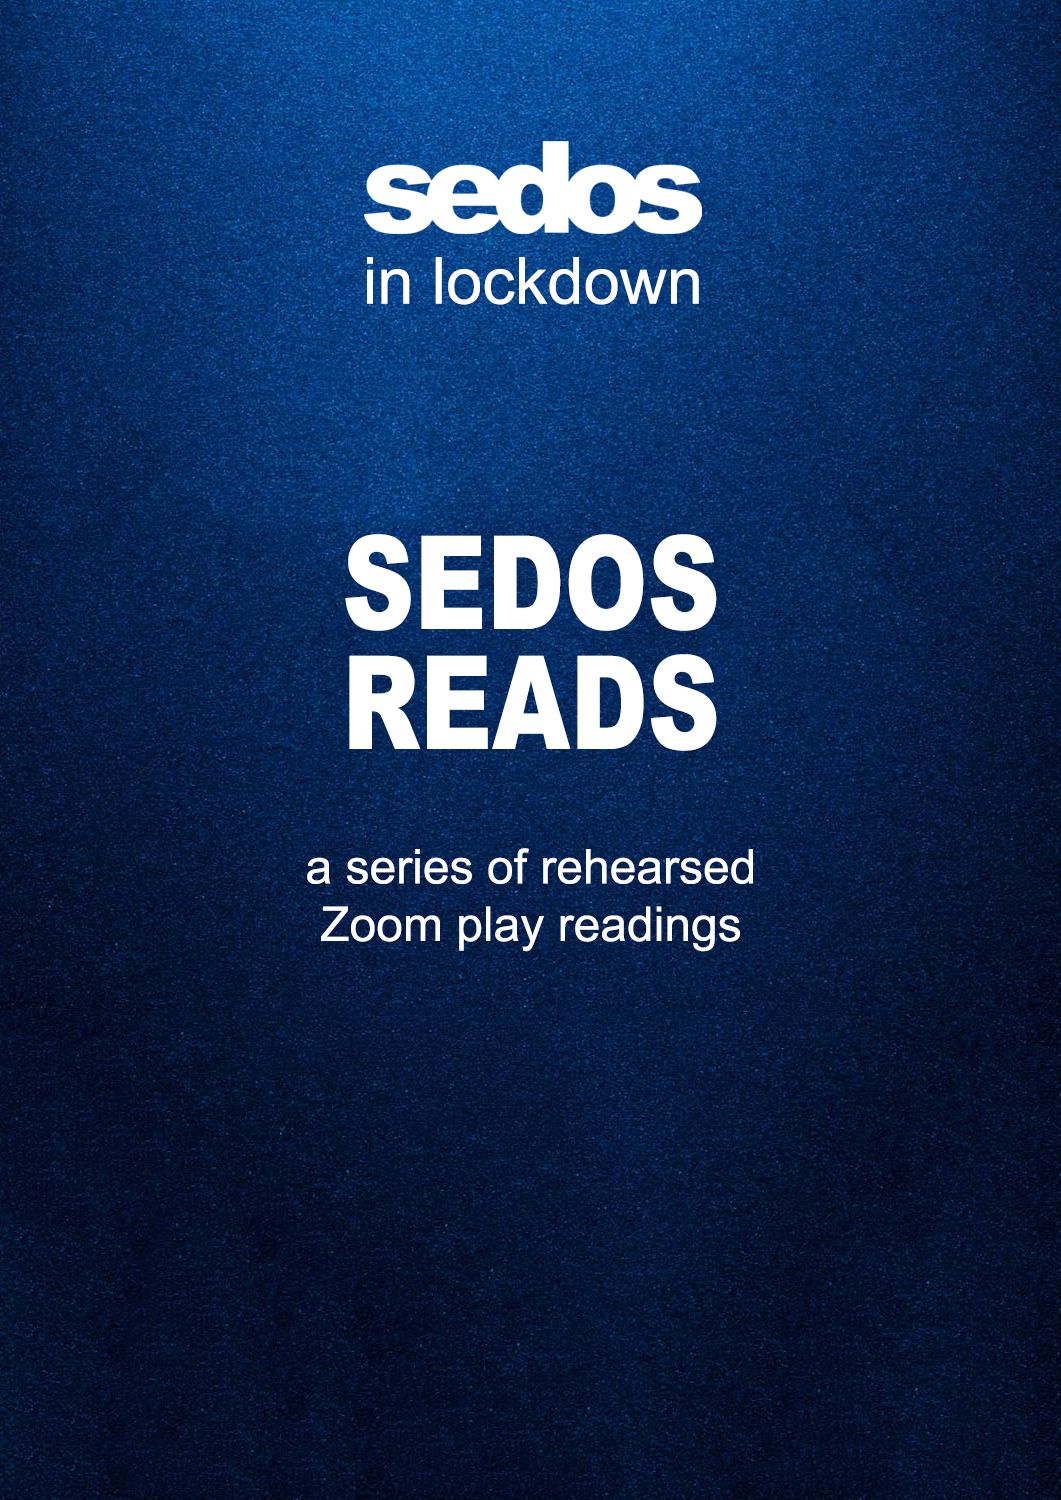 Sedos Reads flyer image